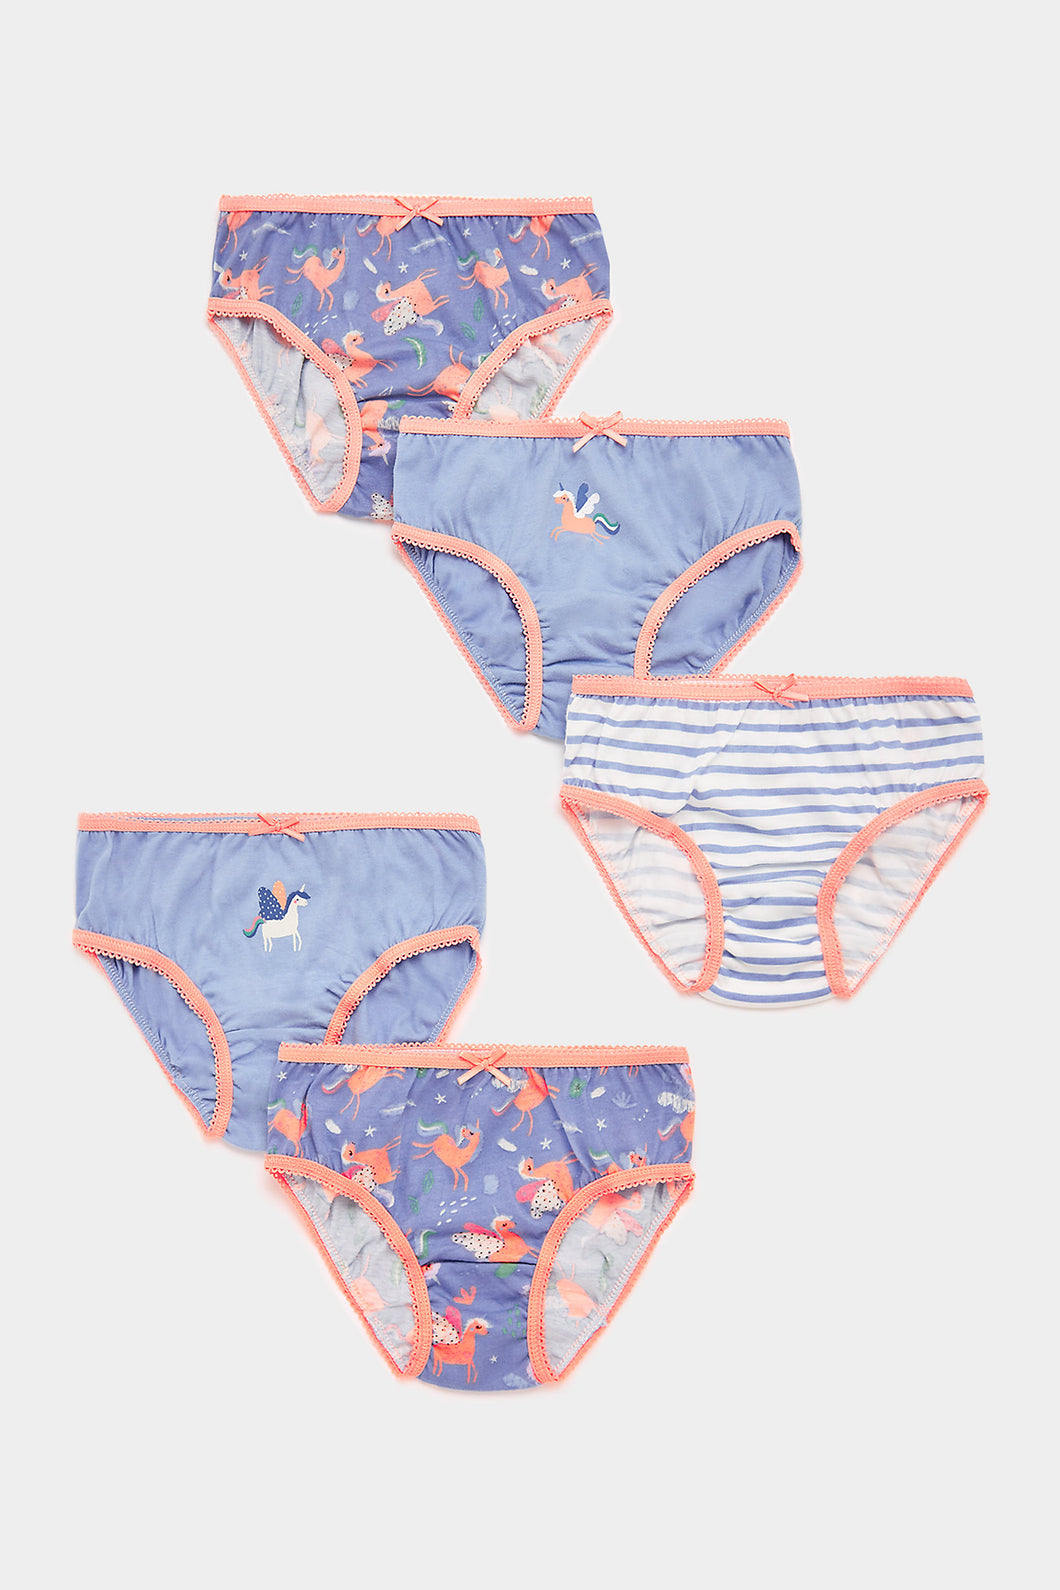 Mothercare Unicorn Briefs - 5 Pack